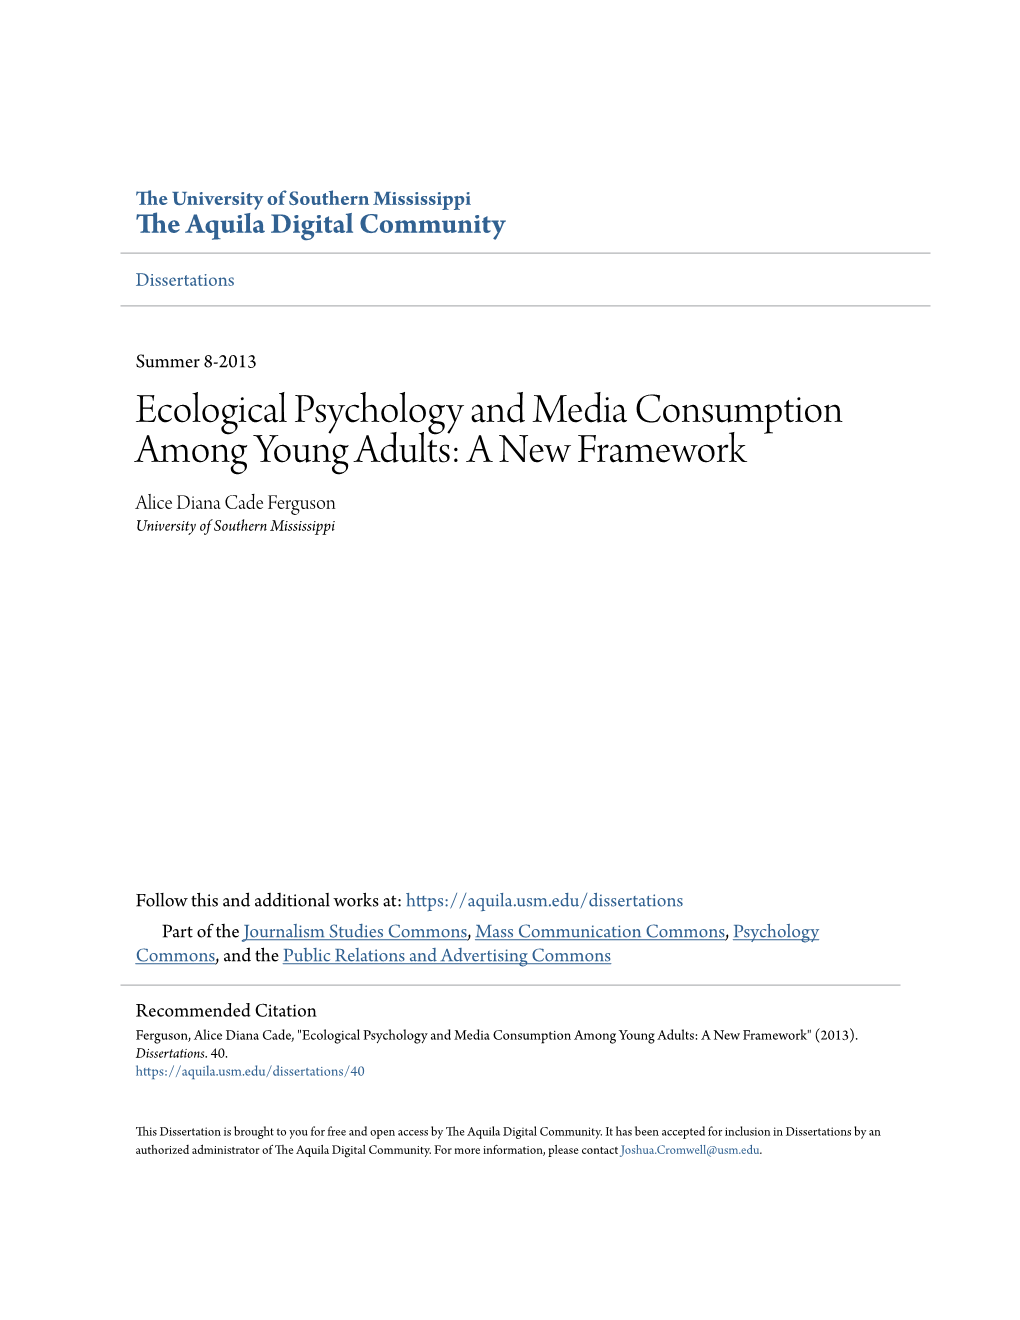 Ecological Psychology and Media Consumption Among Young Adults: a New Framework Alice Diana Cade Ferguson University of Southern Mississippi